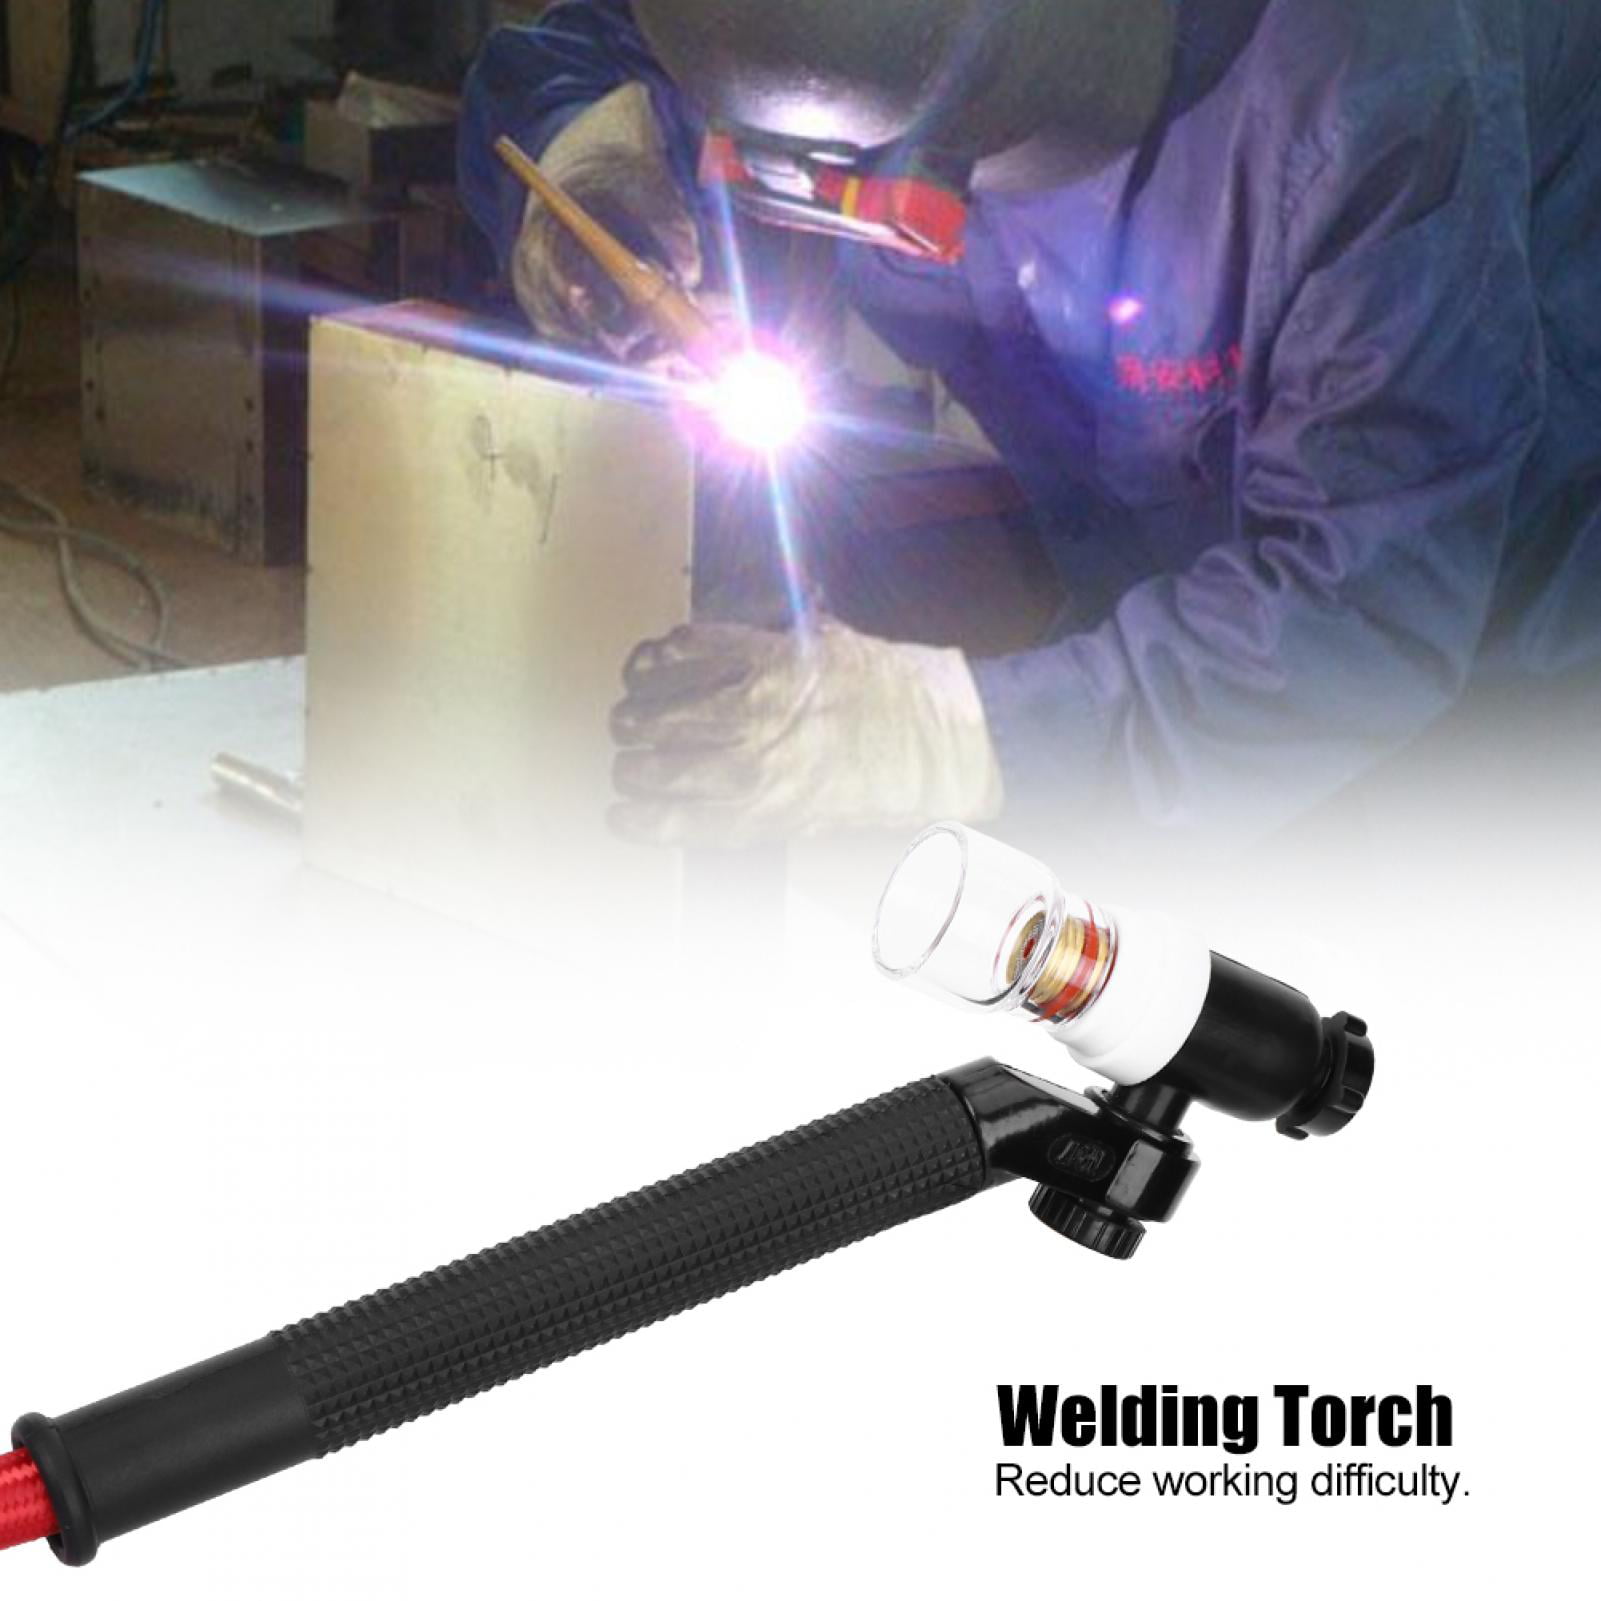 Wear-Resistant Soldering Tool Welding Torch Durable Reduce The Difficulty Of Work for Labor-Saving A Variety Of Welding Environments Welding Easier 